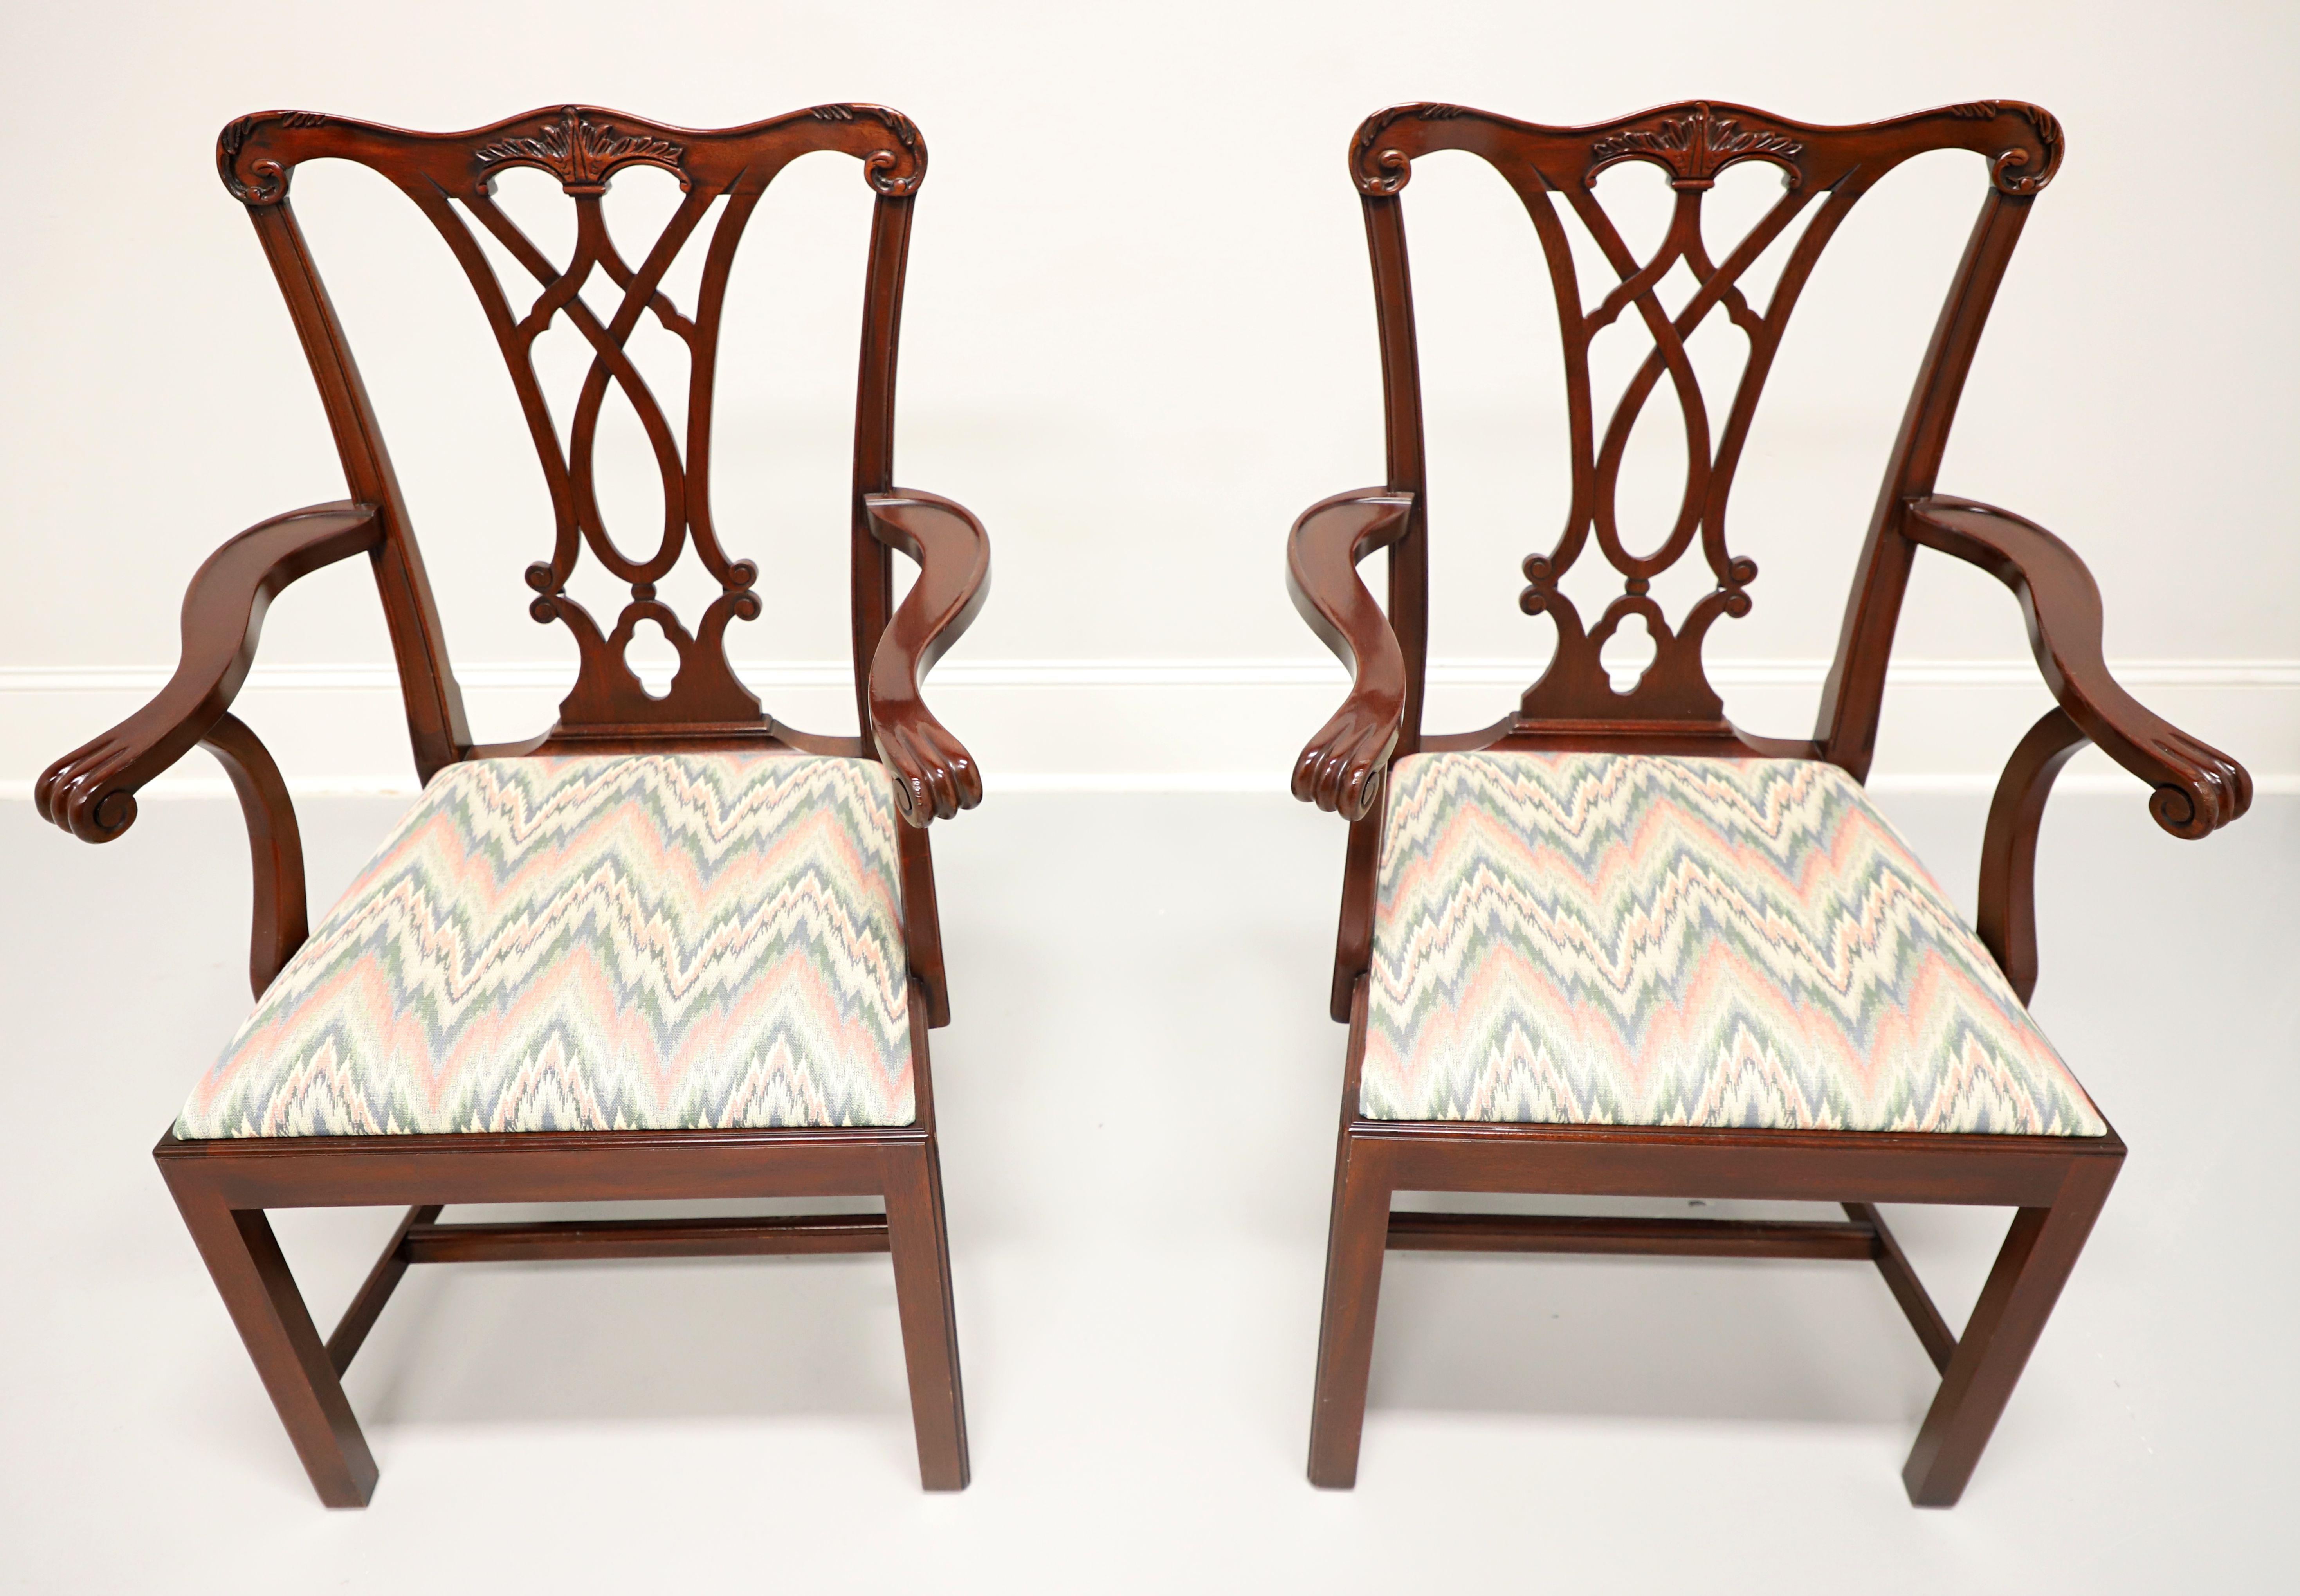 A pair of Chippendale style dining armchairs by Henkel Harris, of Winchester, Virginia, USA. Solid mahogany, carved crest rail & backrest, scroll arms, multi-color flame stitch pattern fabric upholstered seat, straight legs, and stretchers. Made